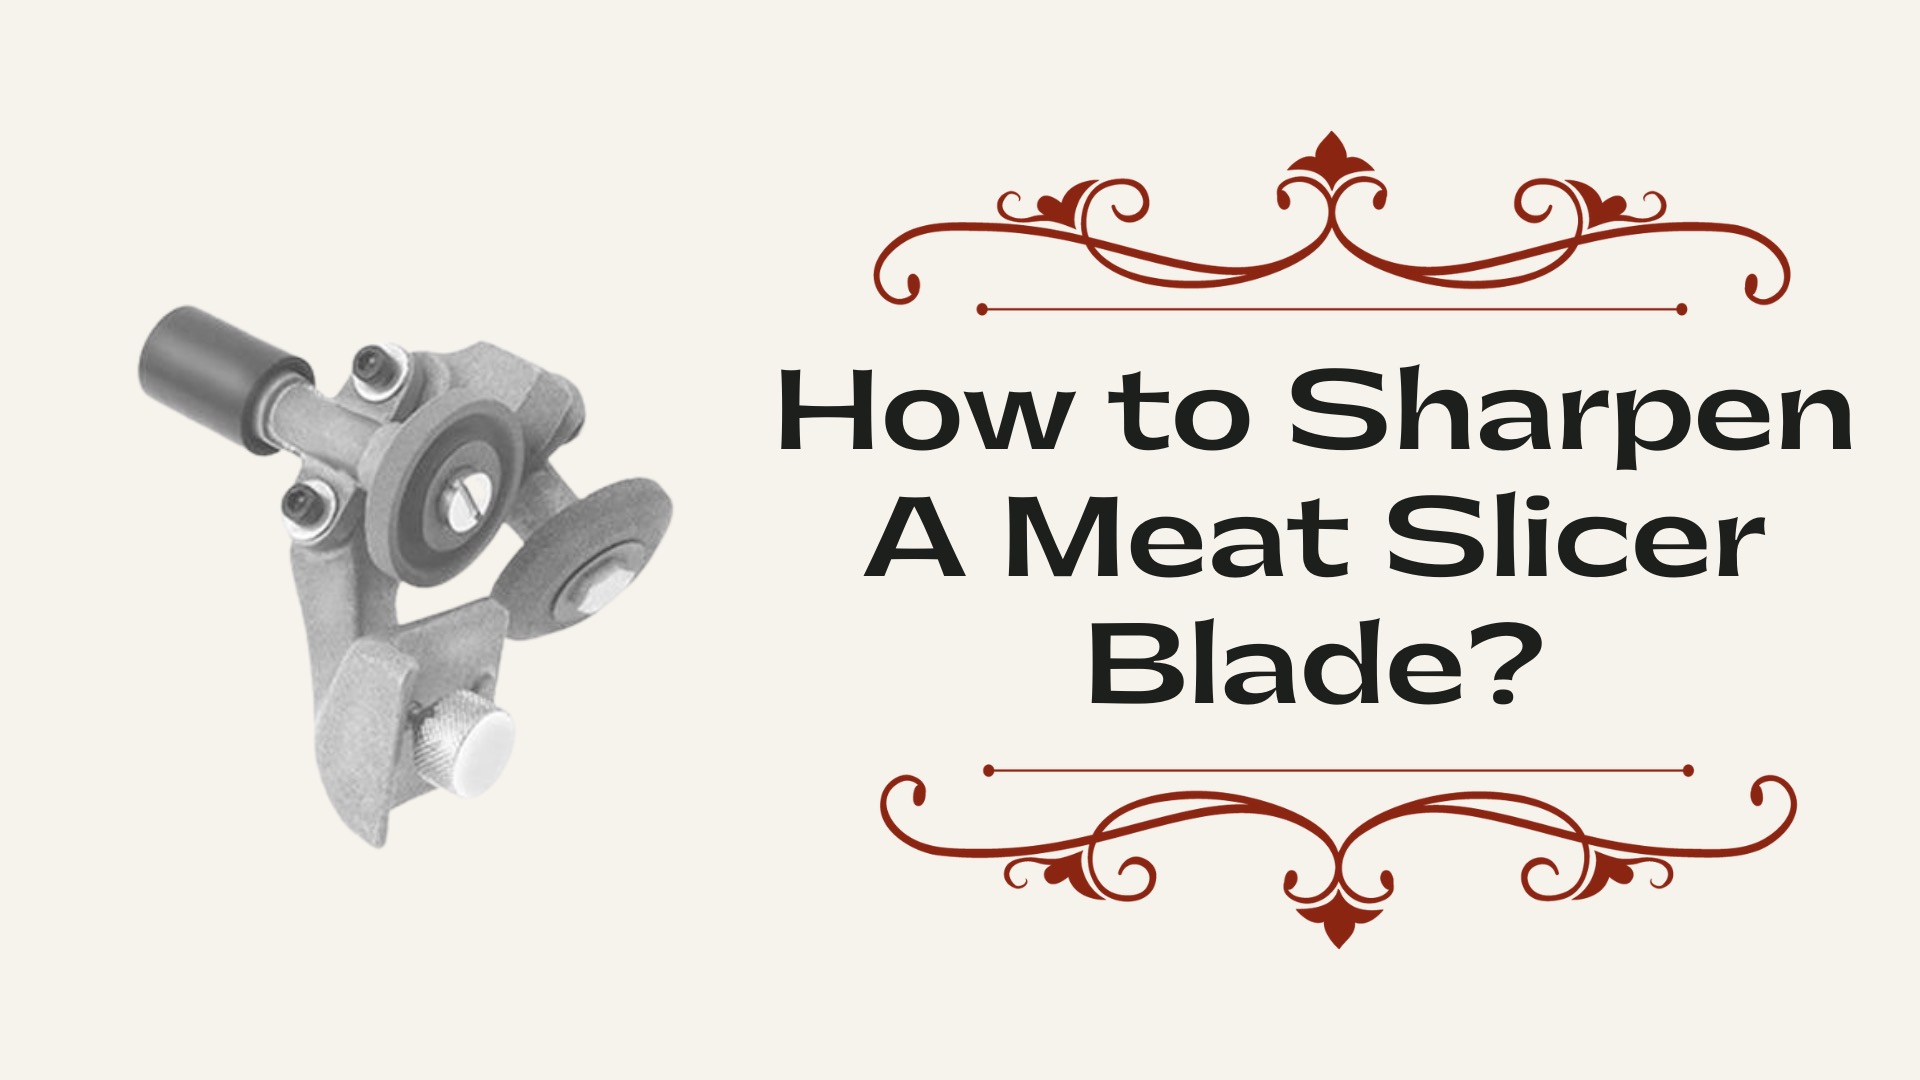 How to Sharpen A Meat Slicer Blade